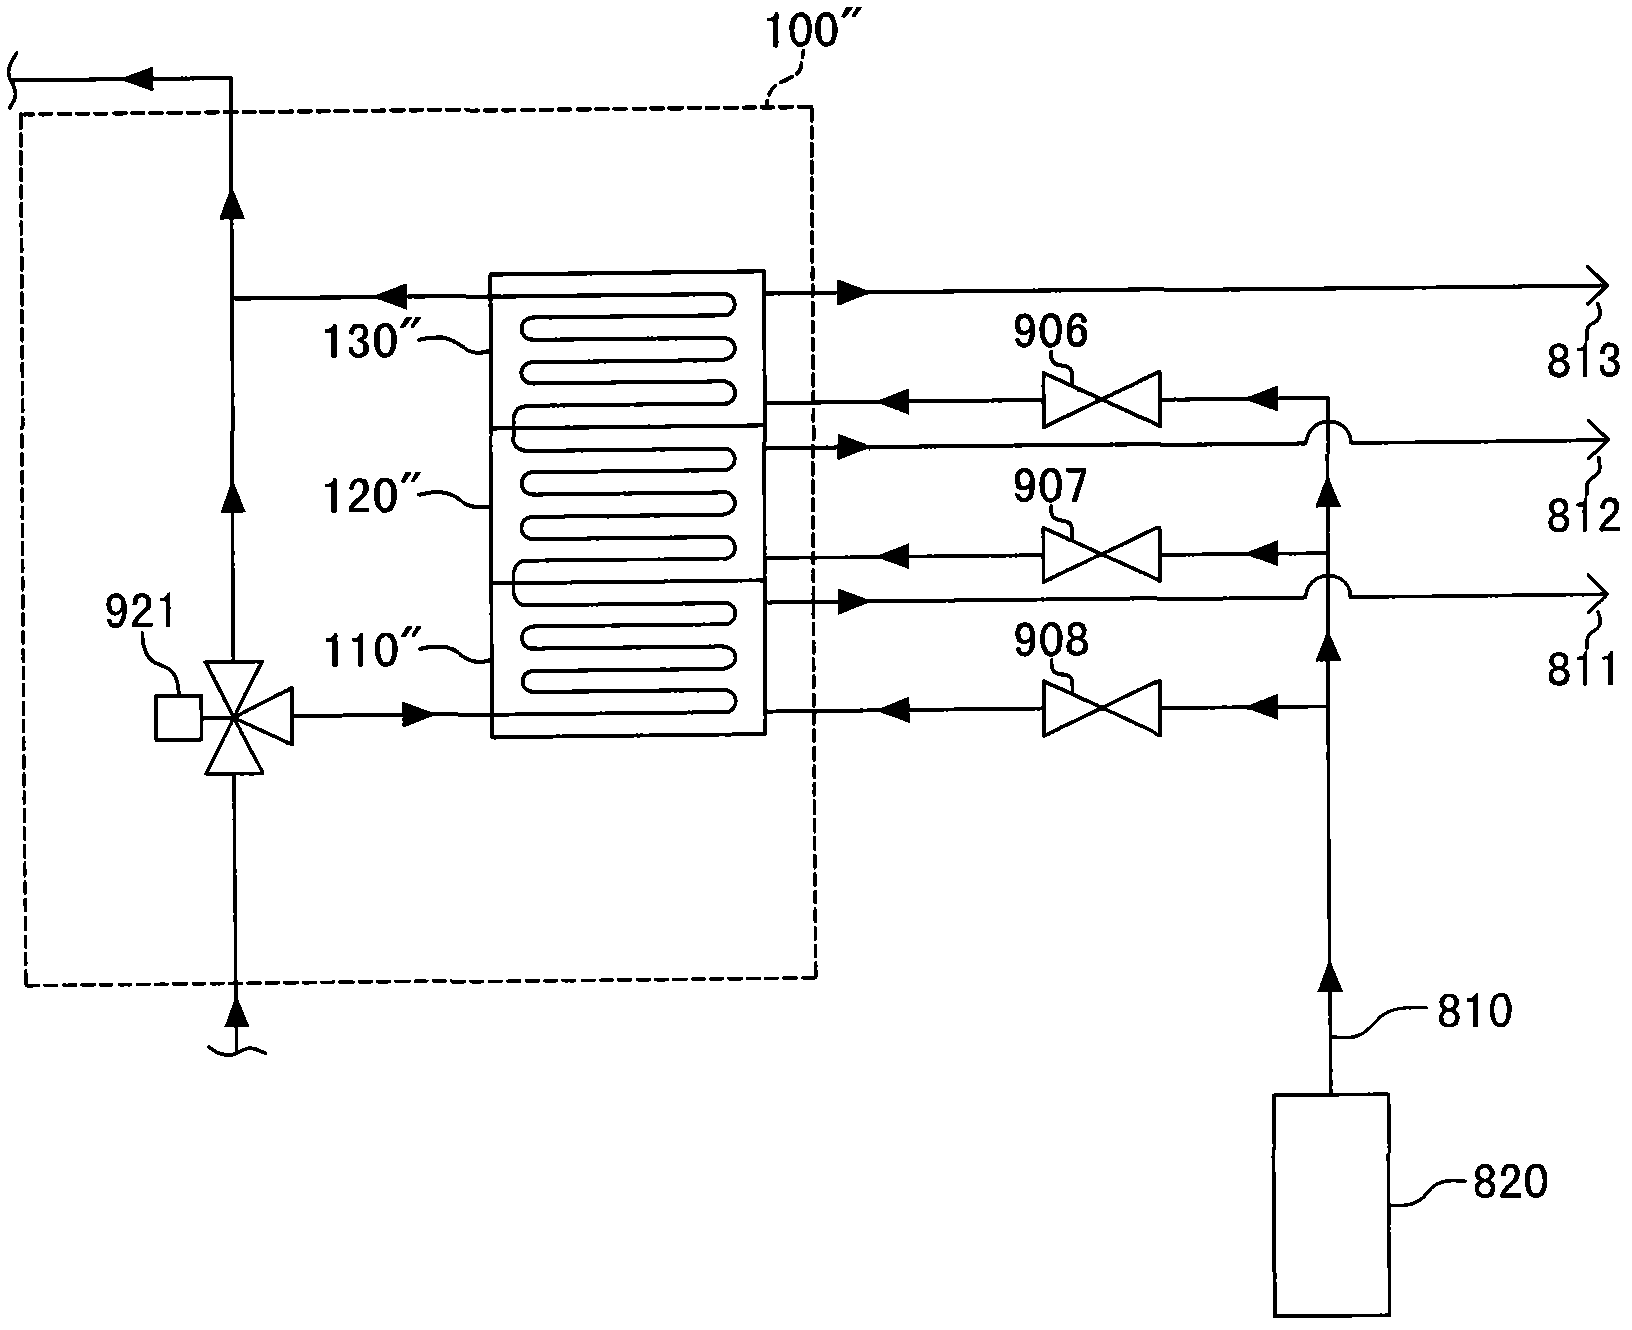 Refrigerant circulation system having heat recovery function